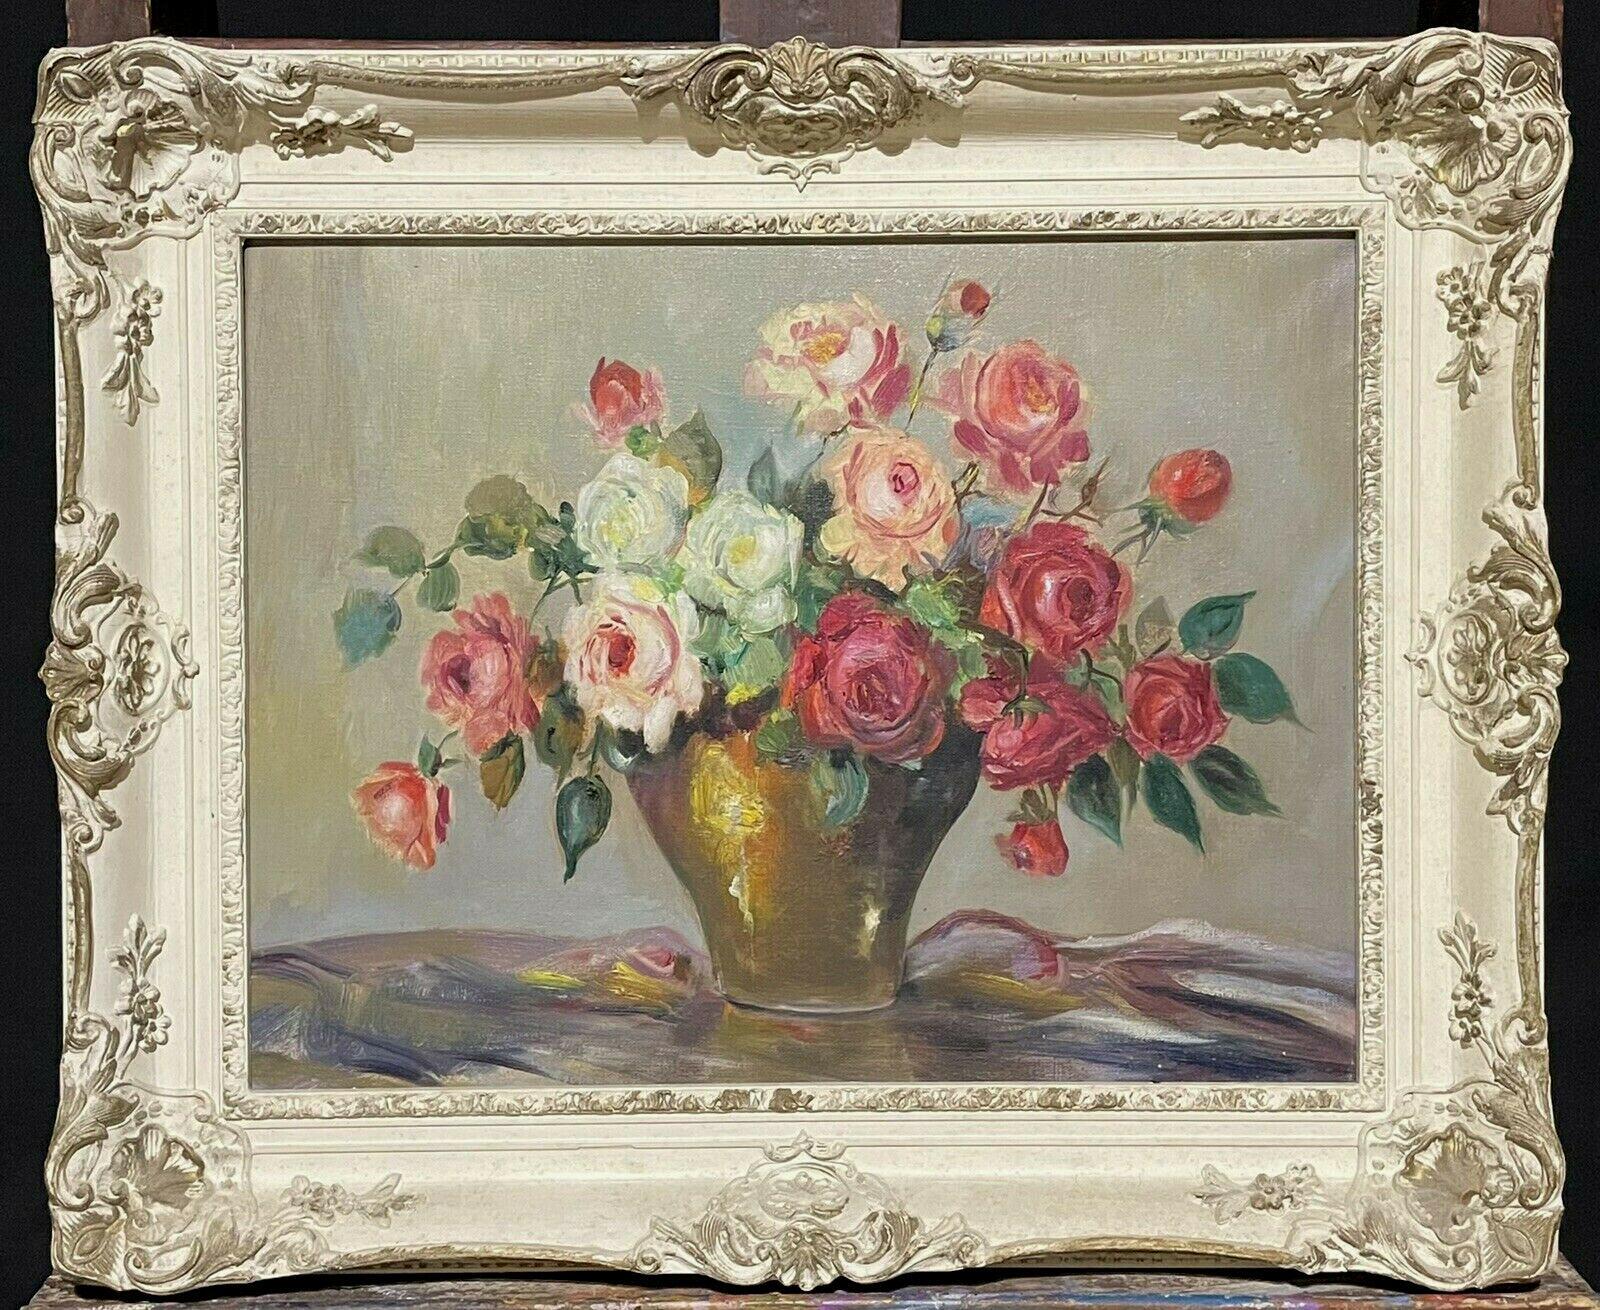 Unknown Still-Life Painting - VINTAGE ENGLISH STILL LIFE OIL PAINTING - ROSES IN VASE - ORIGINAL SHABBY CHIC